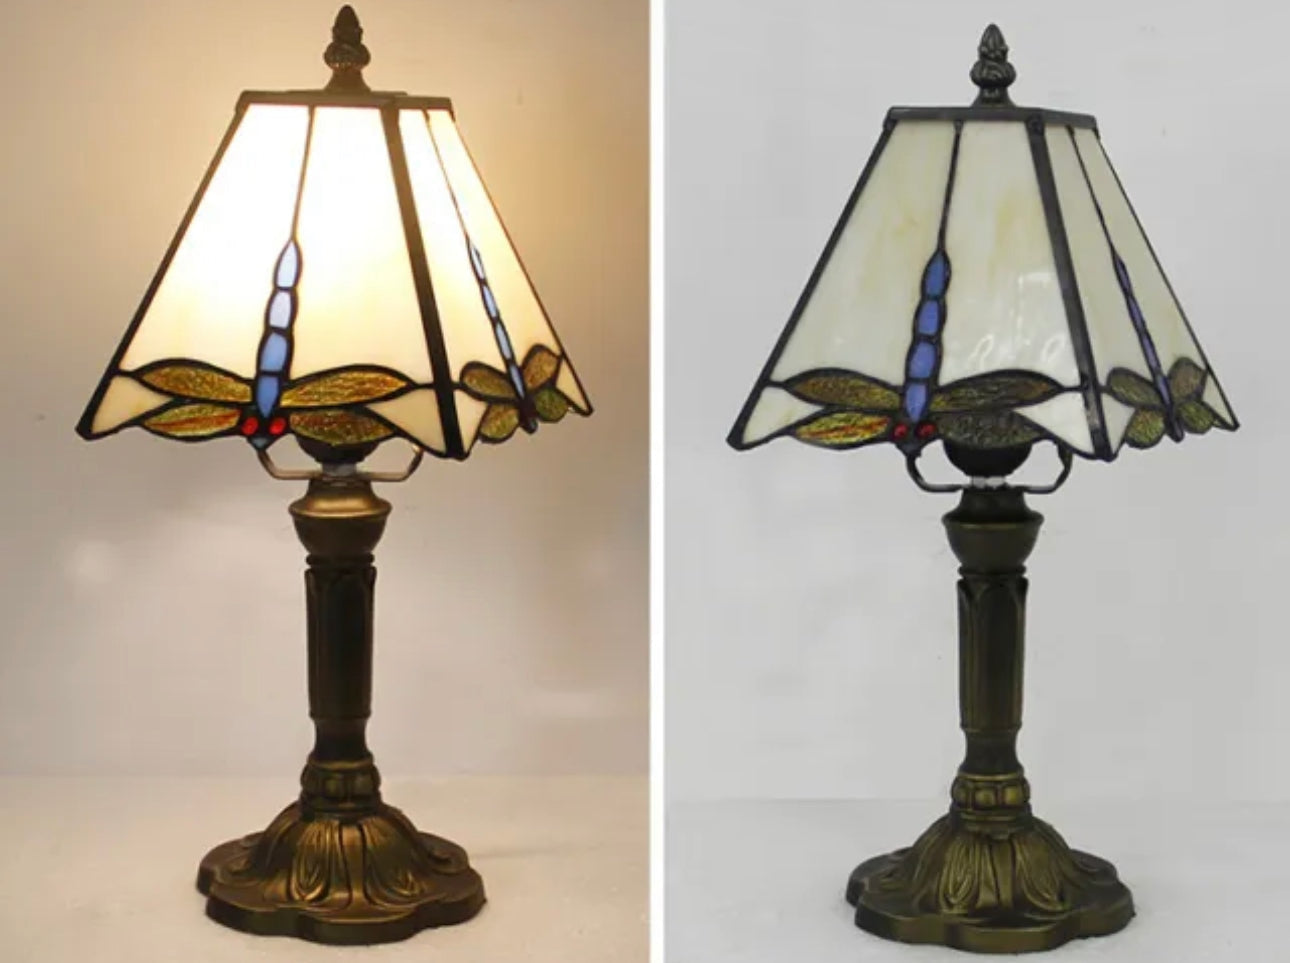 Antique Tiffany Table Lamp With Stained Glass Shade - Lamps